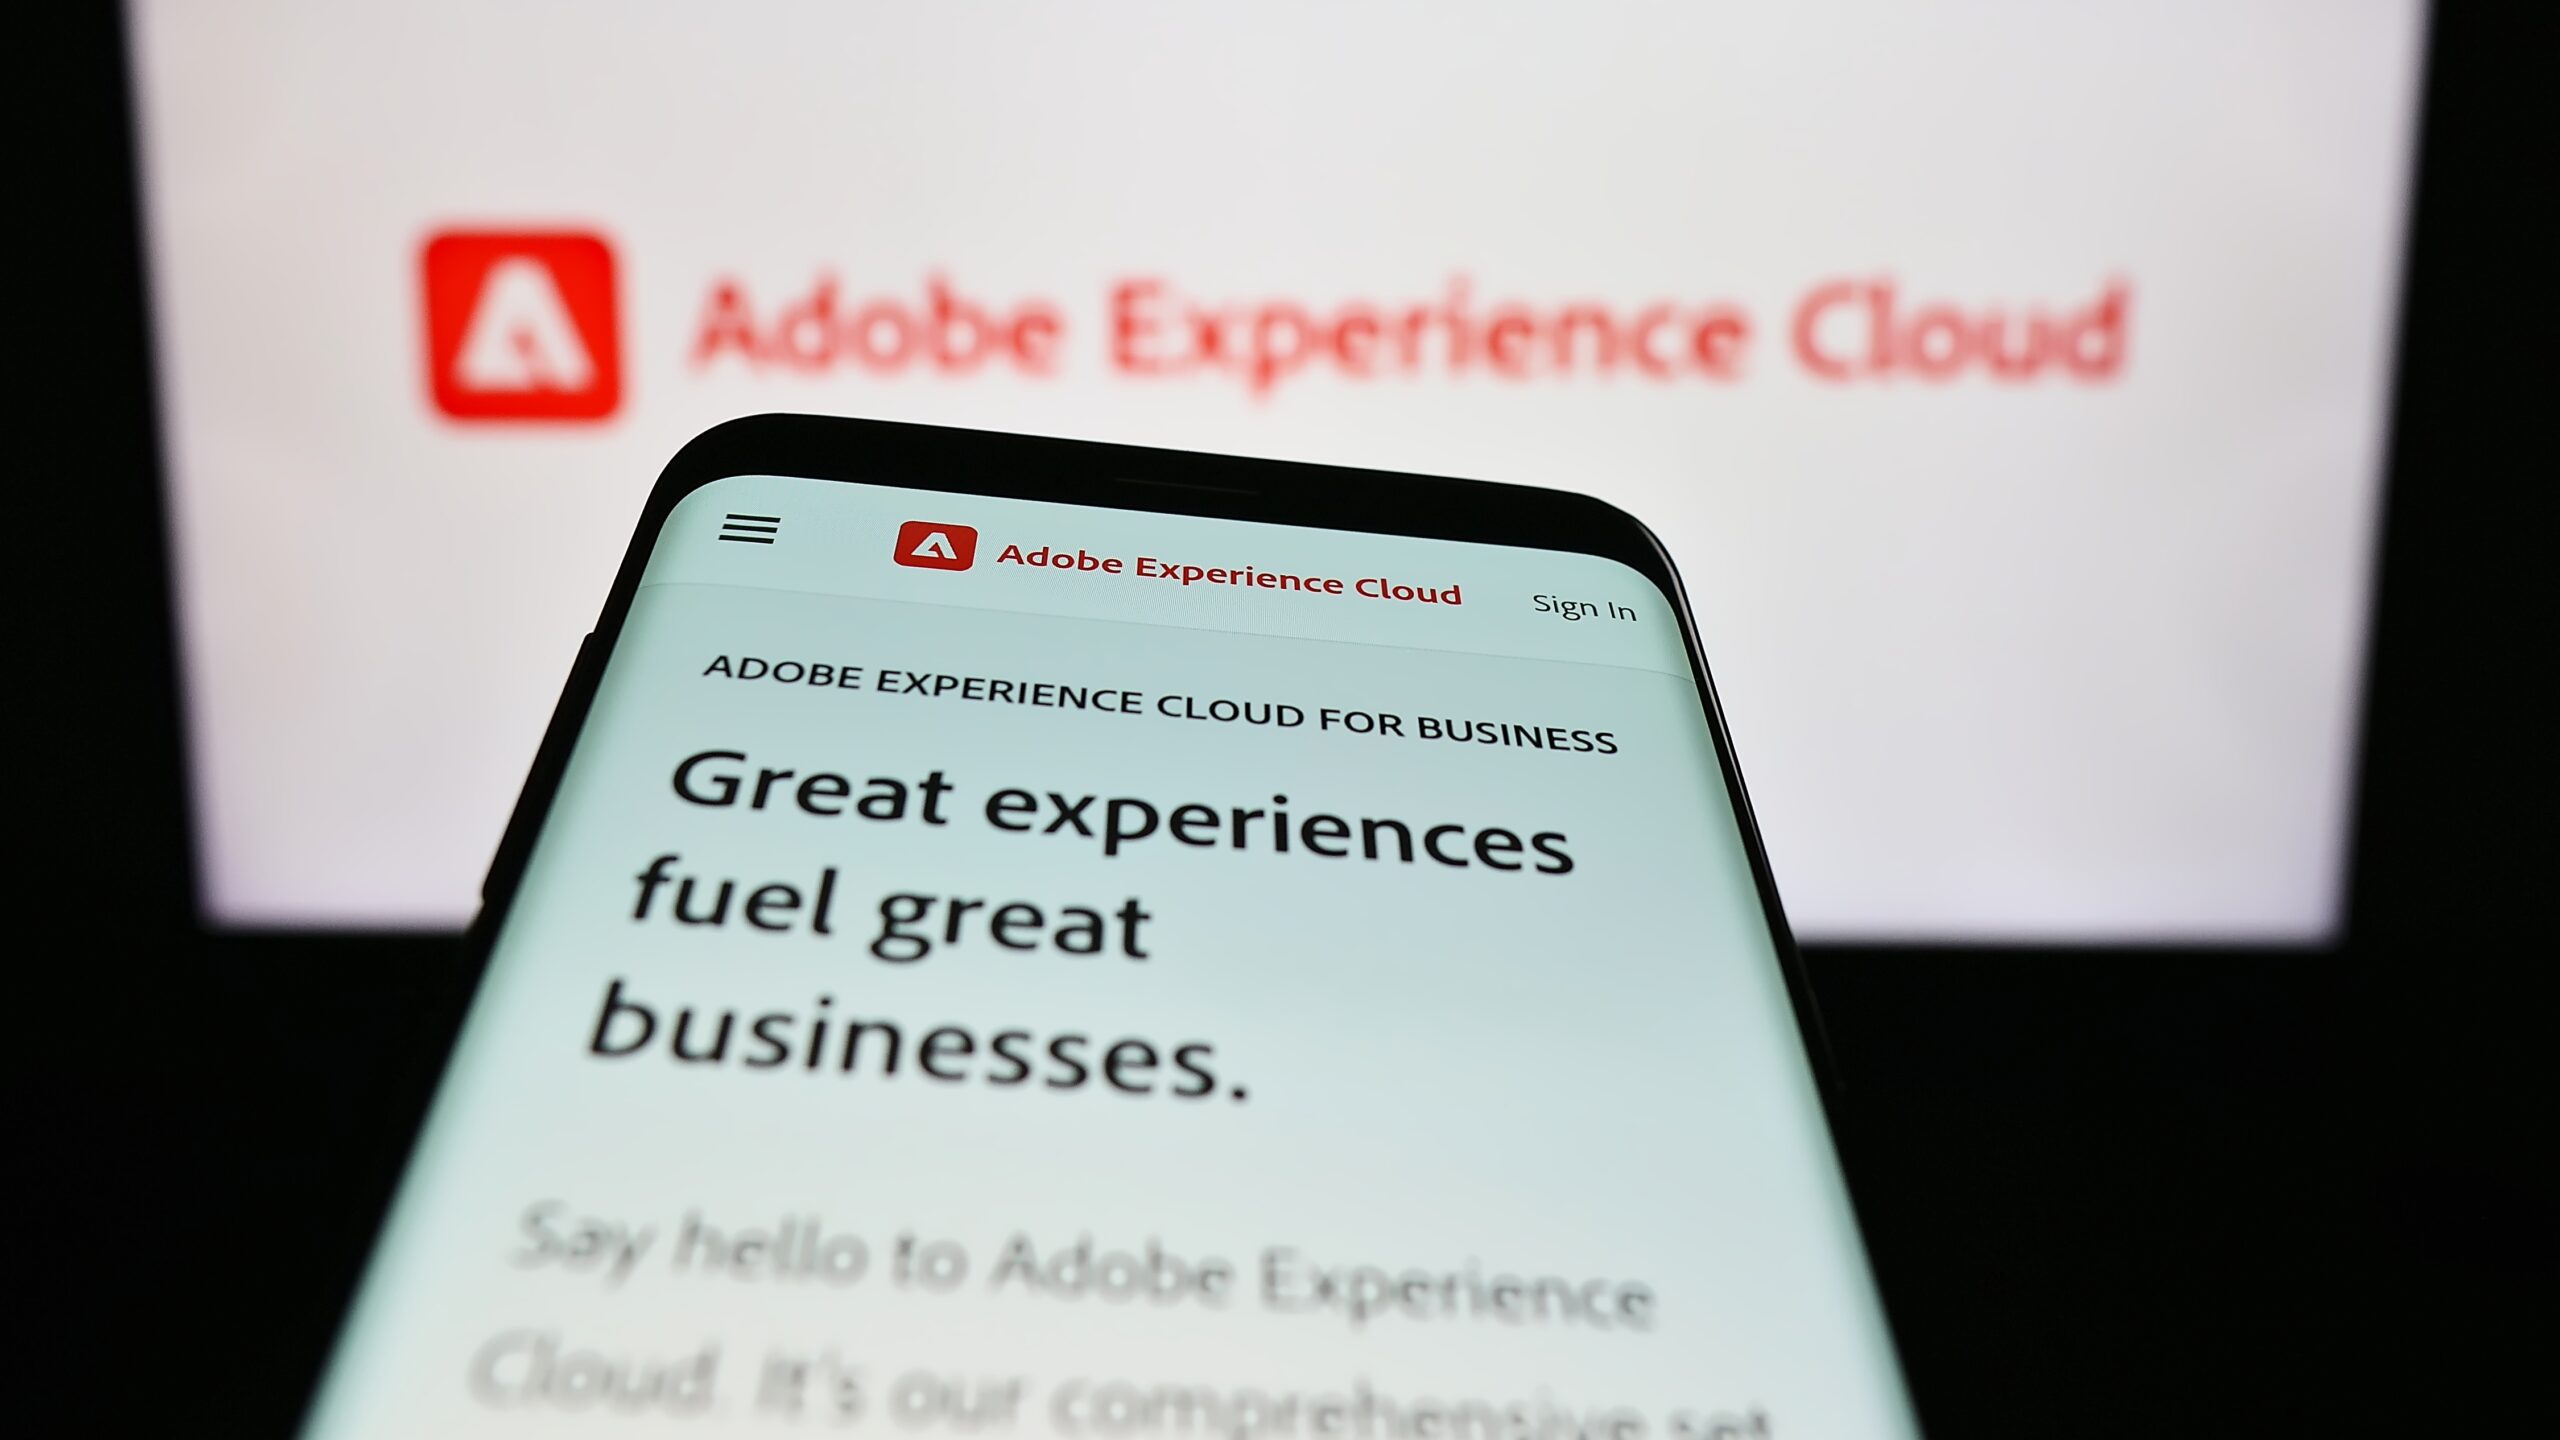 Adobe Campaign’s Potential for Powerful Customer Connections